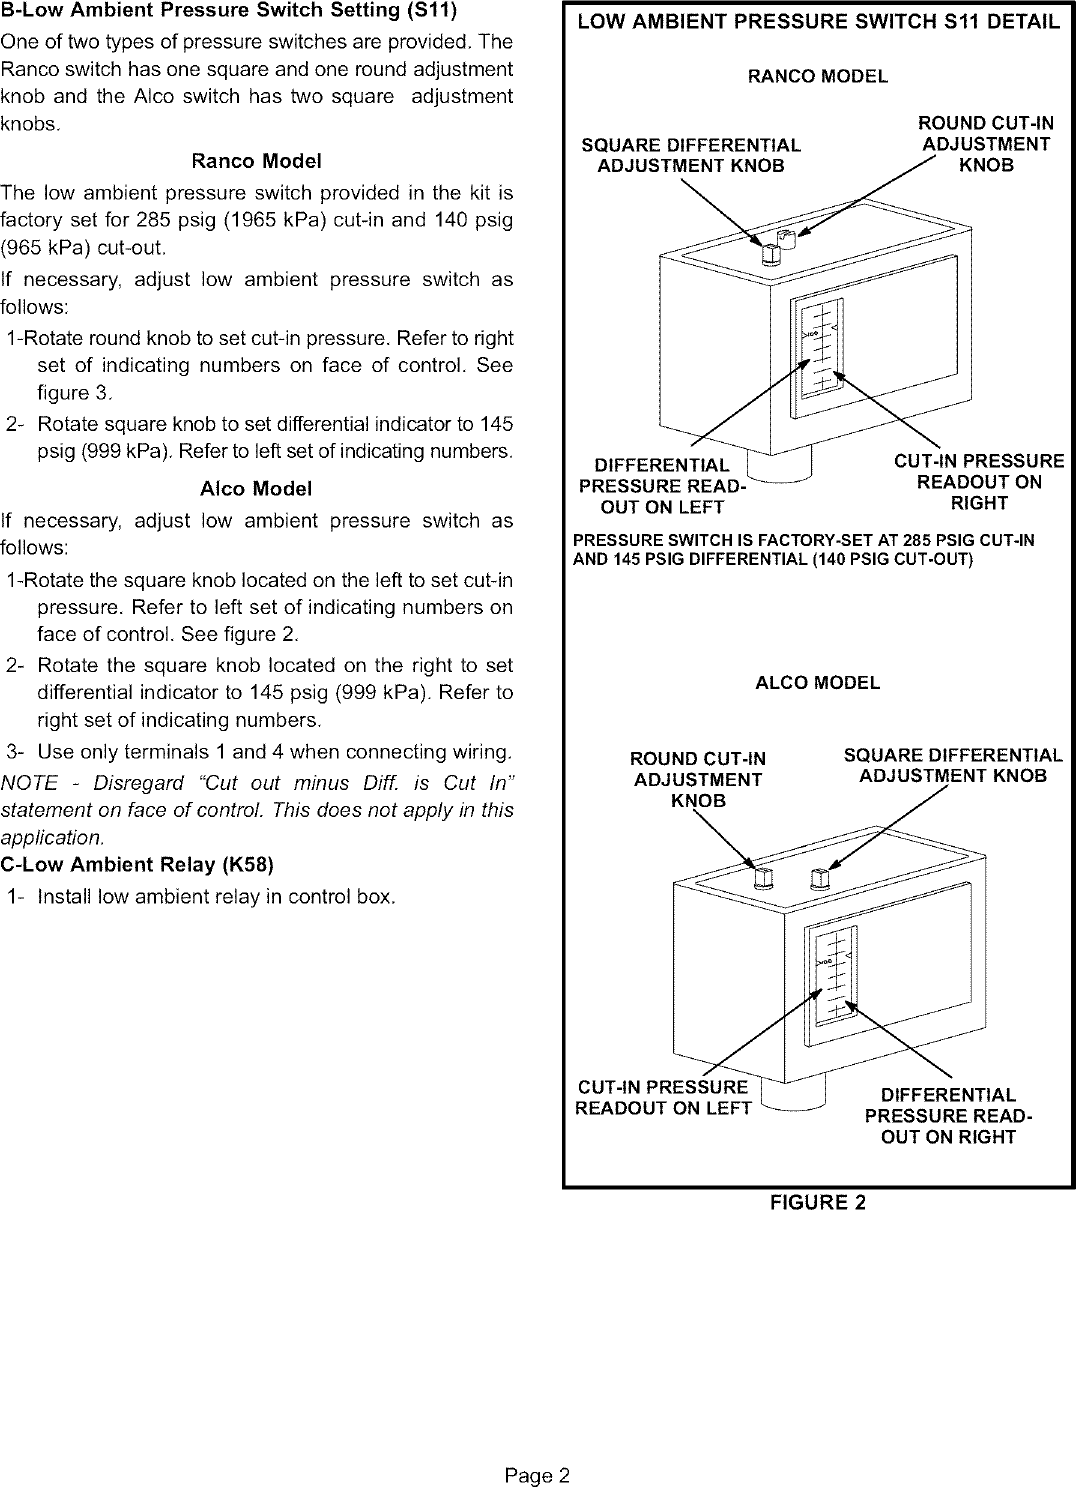 Page 2 of 12 - LENNOX  Controls And HVAC Accessories Manual L0806303